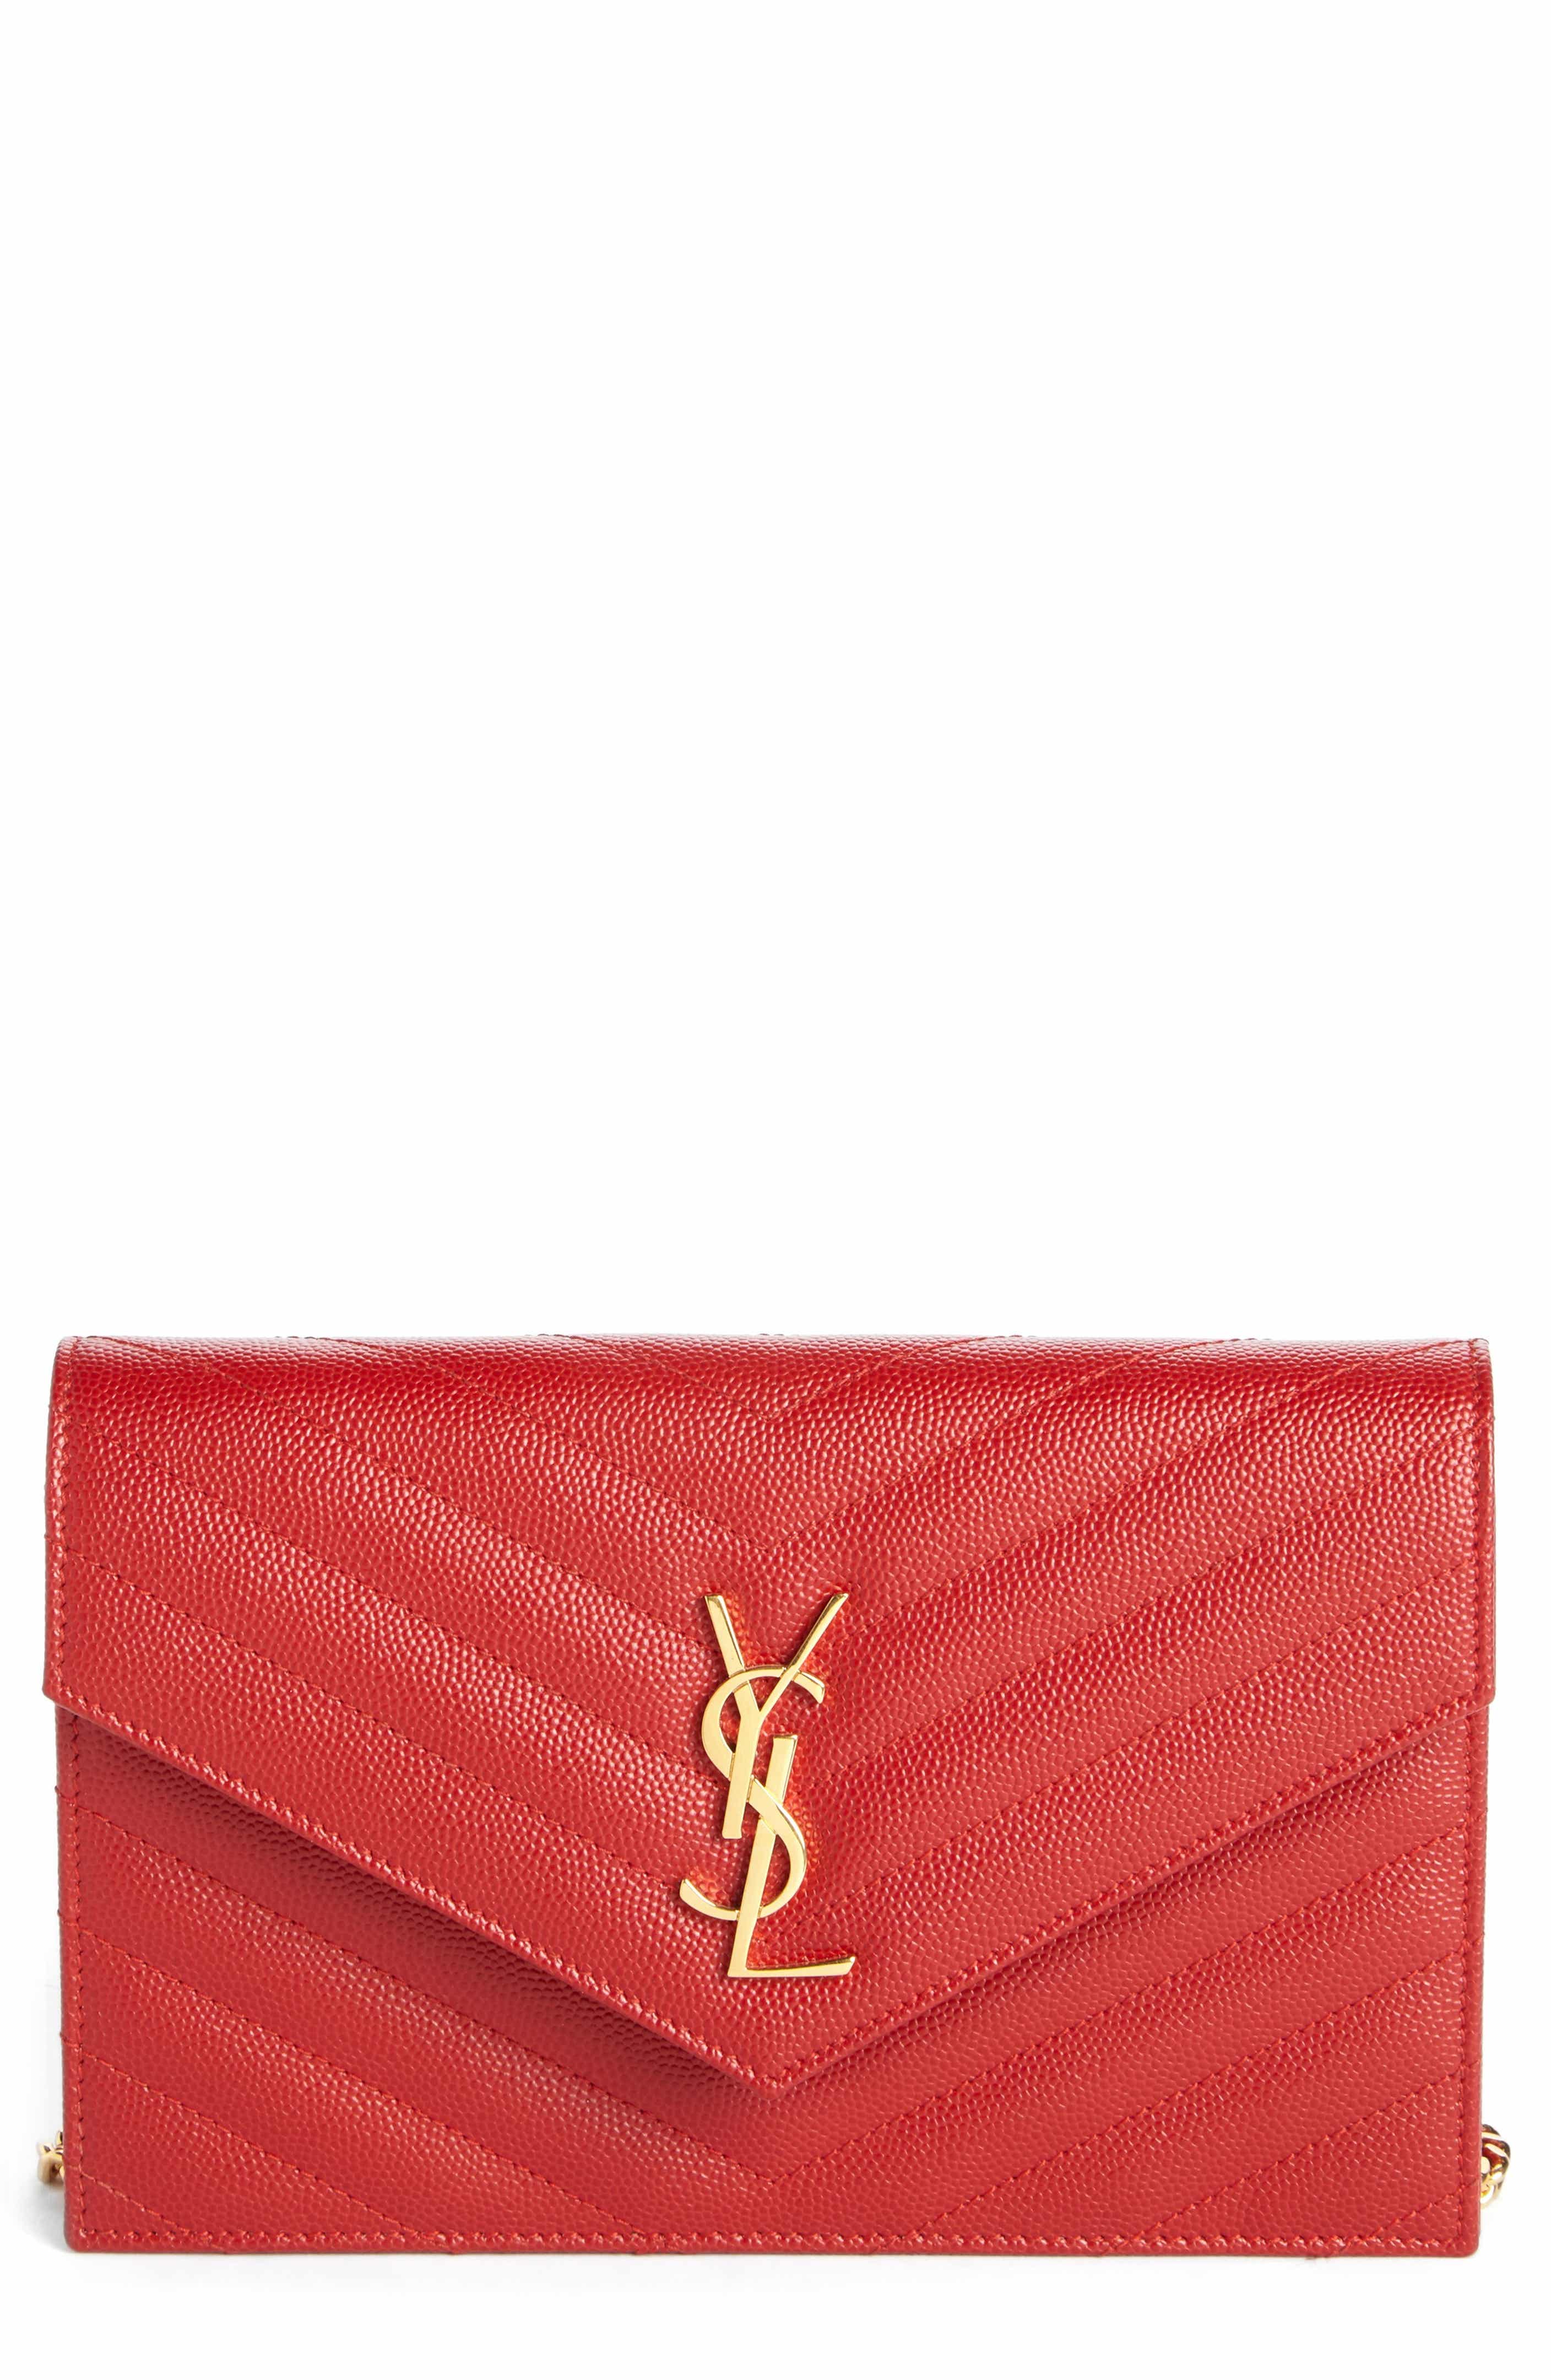 Saint Laurent 'Small Mono' Leather Wallet on a Chain | Nordstrom